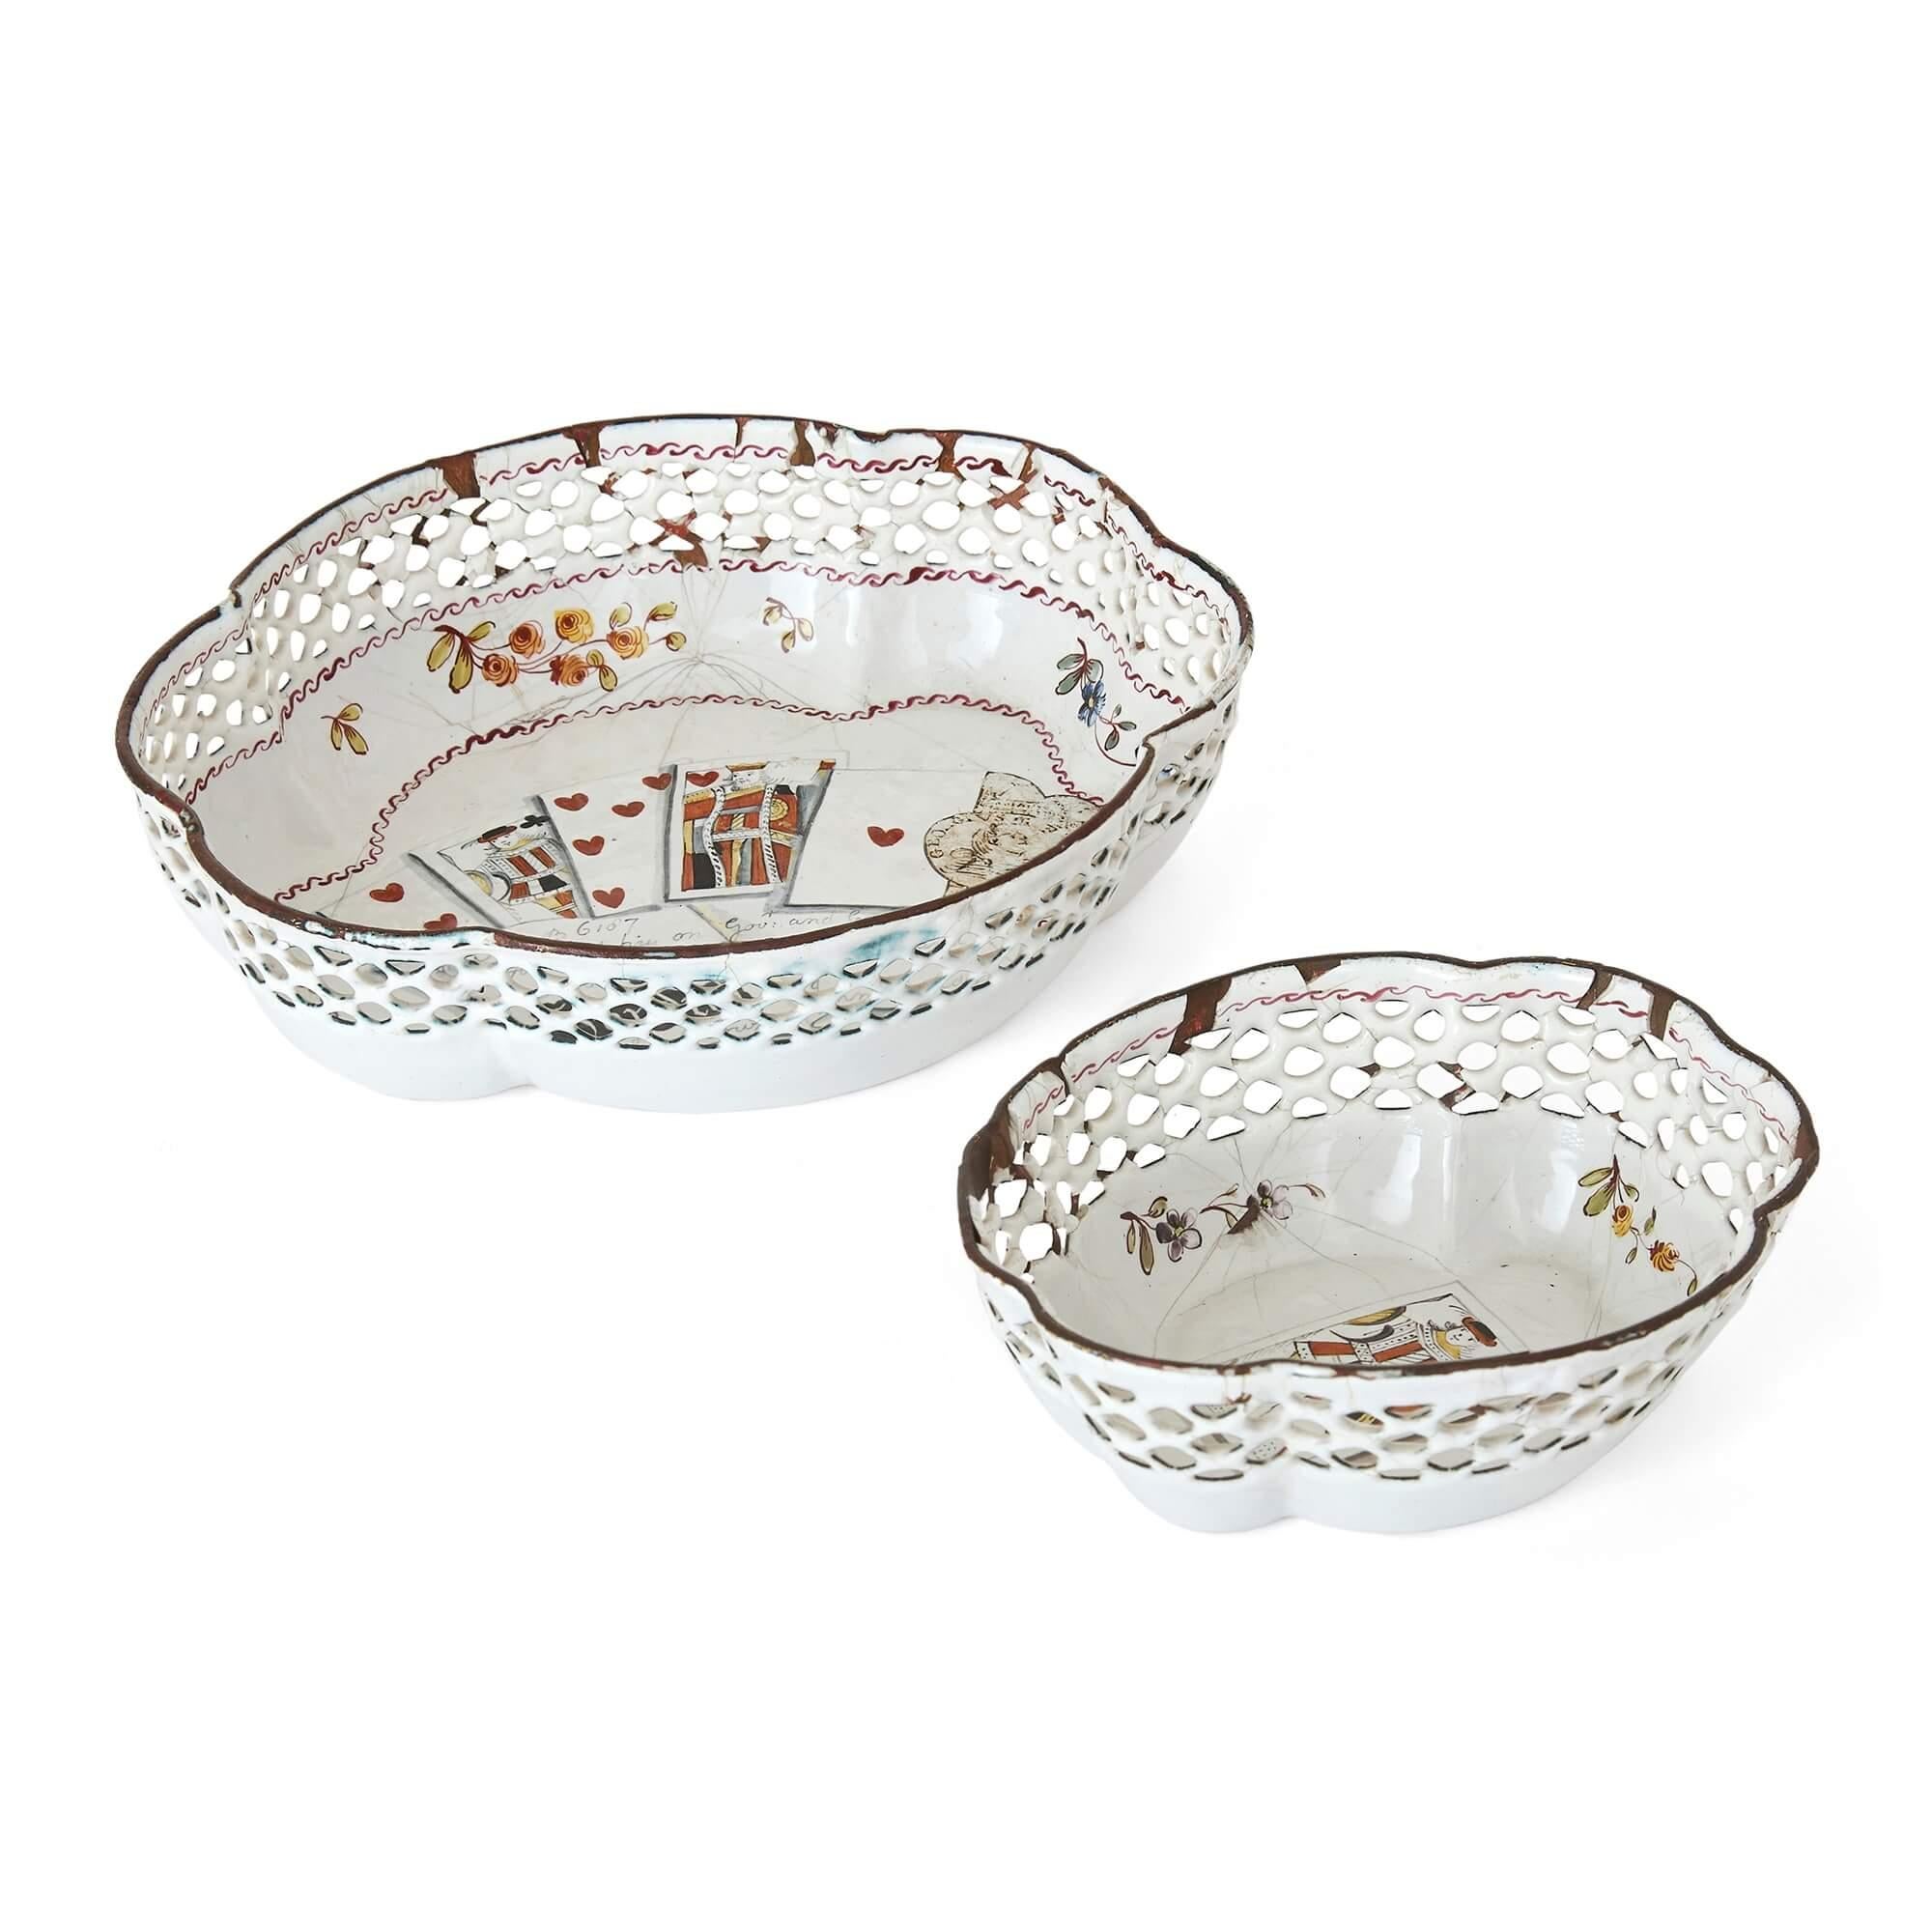 Pair of antique enamelled Staffordshire English dishes with playing cards
English, early 19th Century
Larger dish: Height 3.5cm, width 13cm, depth 11.5cm
Smaller dish: Height 3cm, width 9cm, depth 7.5cm

This charming and delicate pair of